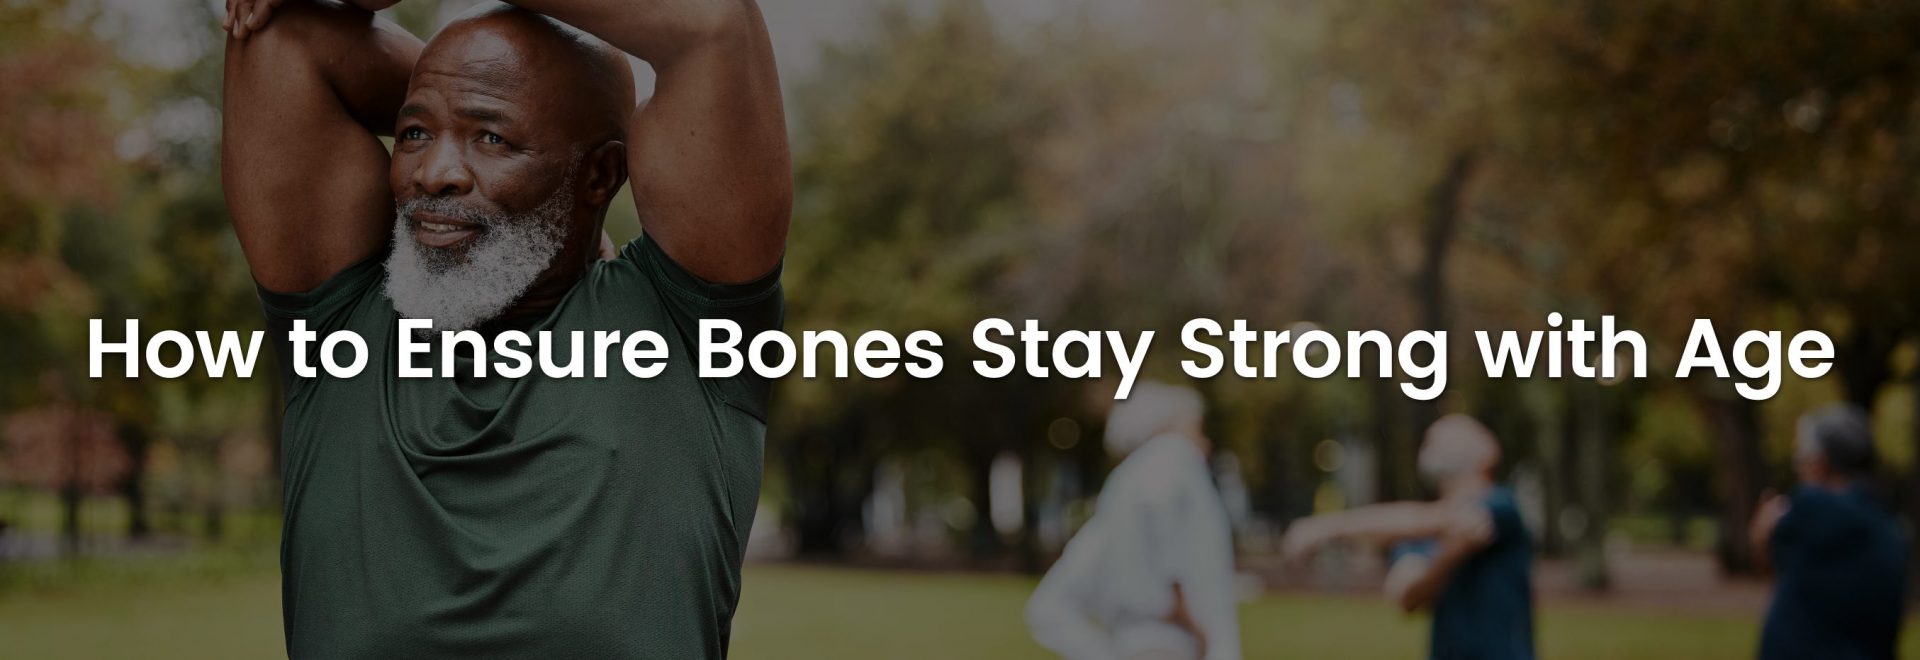 How to Ensure Bones Stay Strong with Age | Banner Image